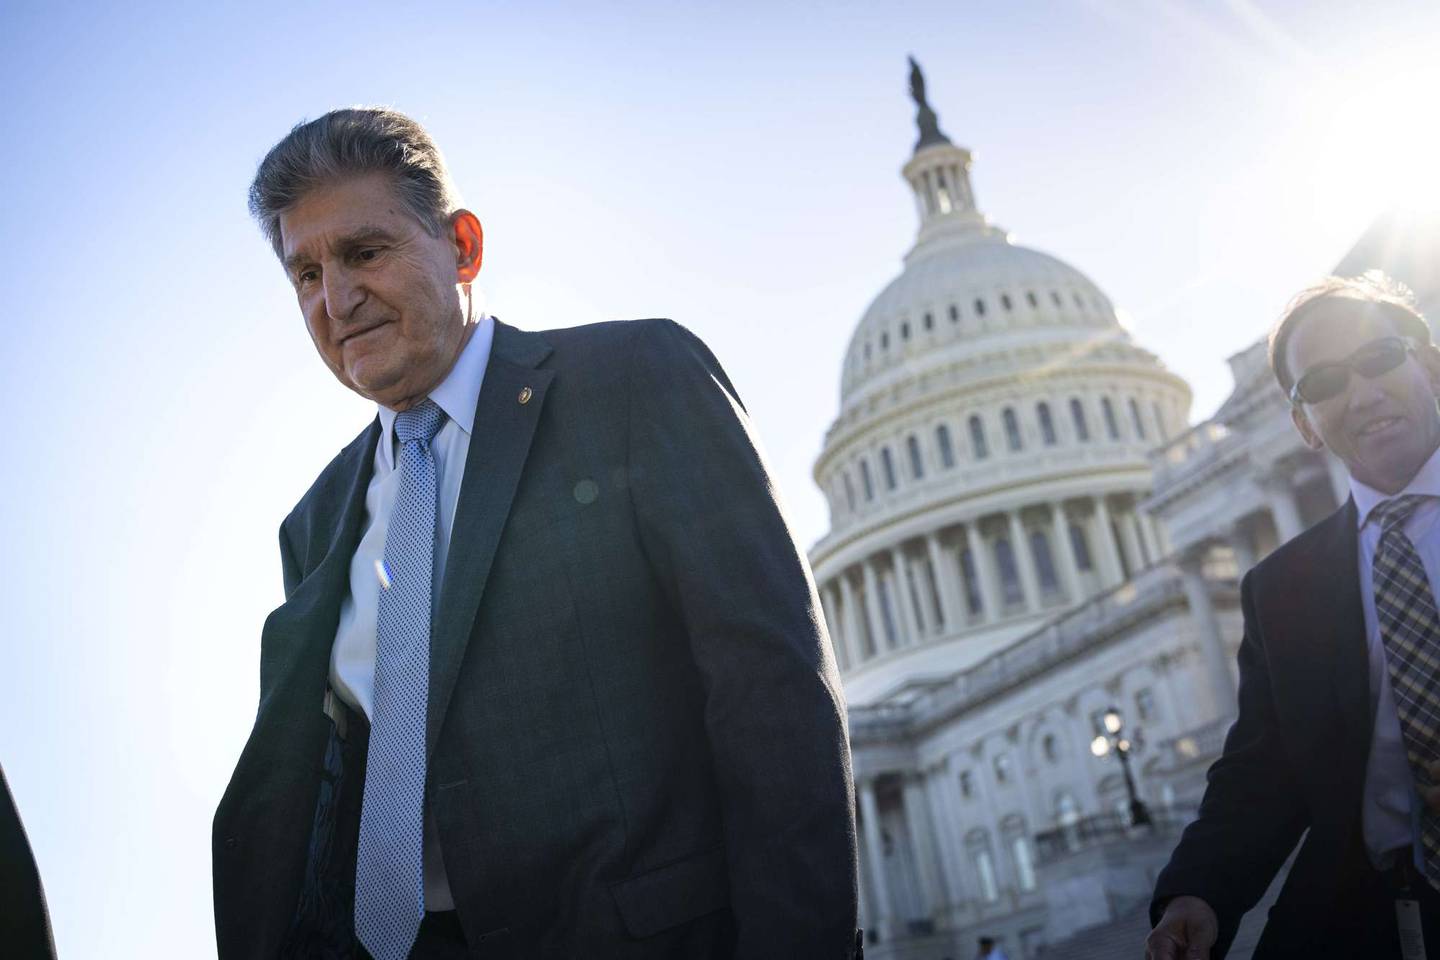 WASHINGTON, DC - OCTOBER 27: Sen. Joe Manchin (D-WV) leaves the U.S. Capitol after a vote October 27, 2021 in Washington, DC. Democrats are continuing internal negotiations about the Biden administration's social policy spending bill.   Drew Angerer/Getty Images/AFP
== FOR NEWSPAPERS, INTERNET, TELCOS & TELEVISION USE ONLY ==